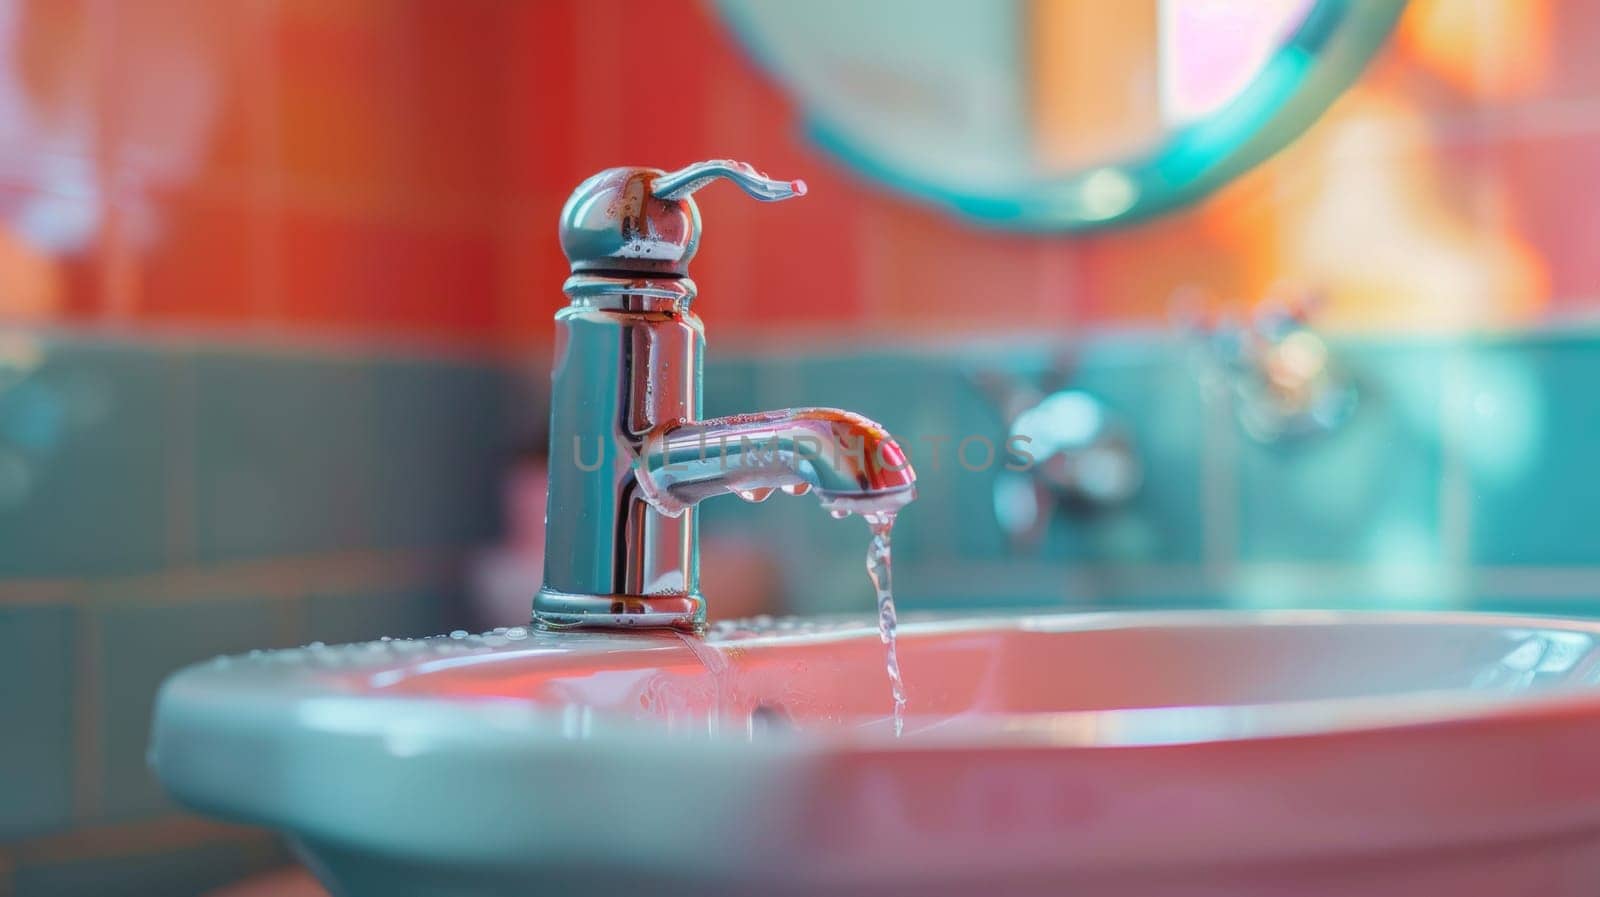 A close up of a sink with water running from the faucet, AI by starush